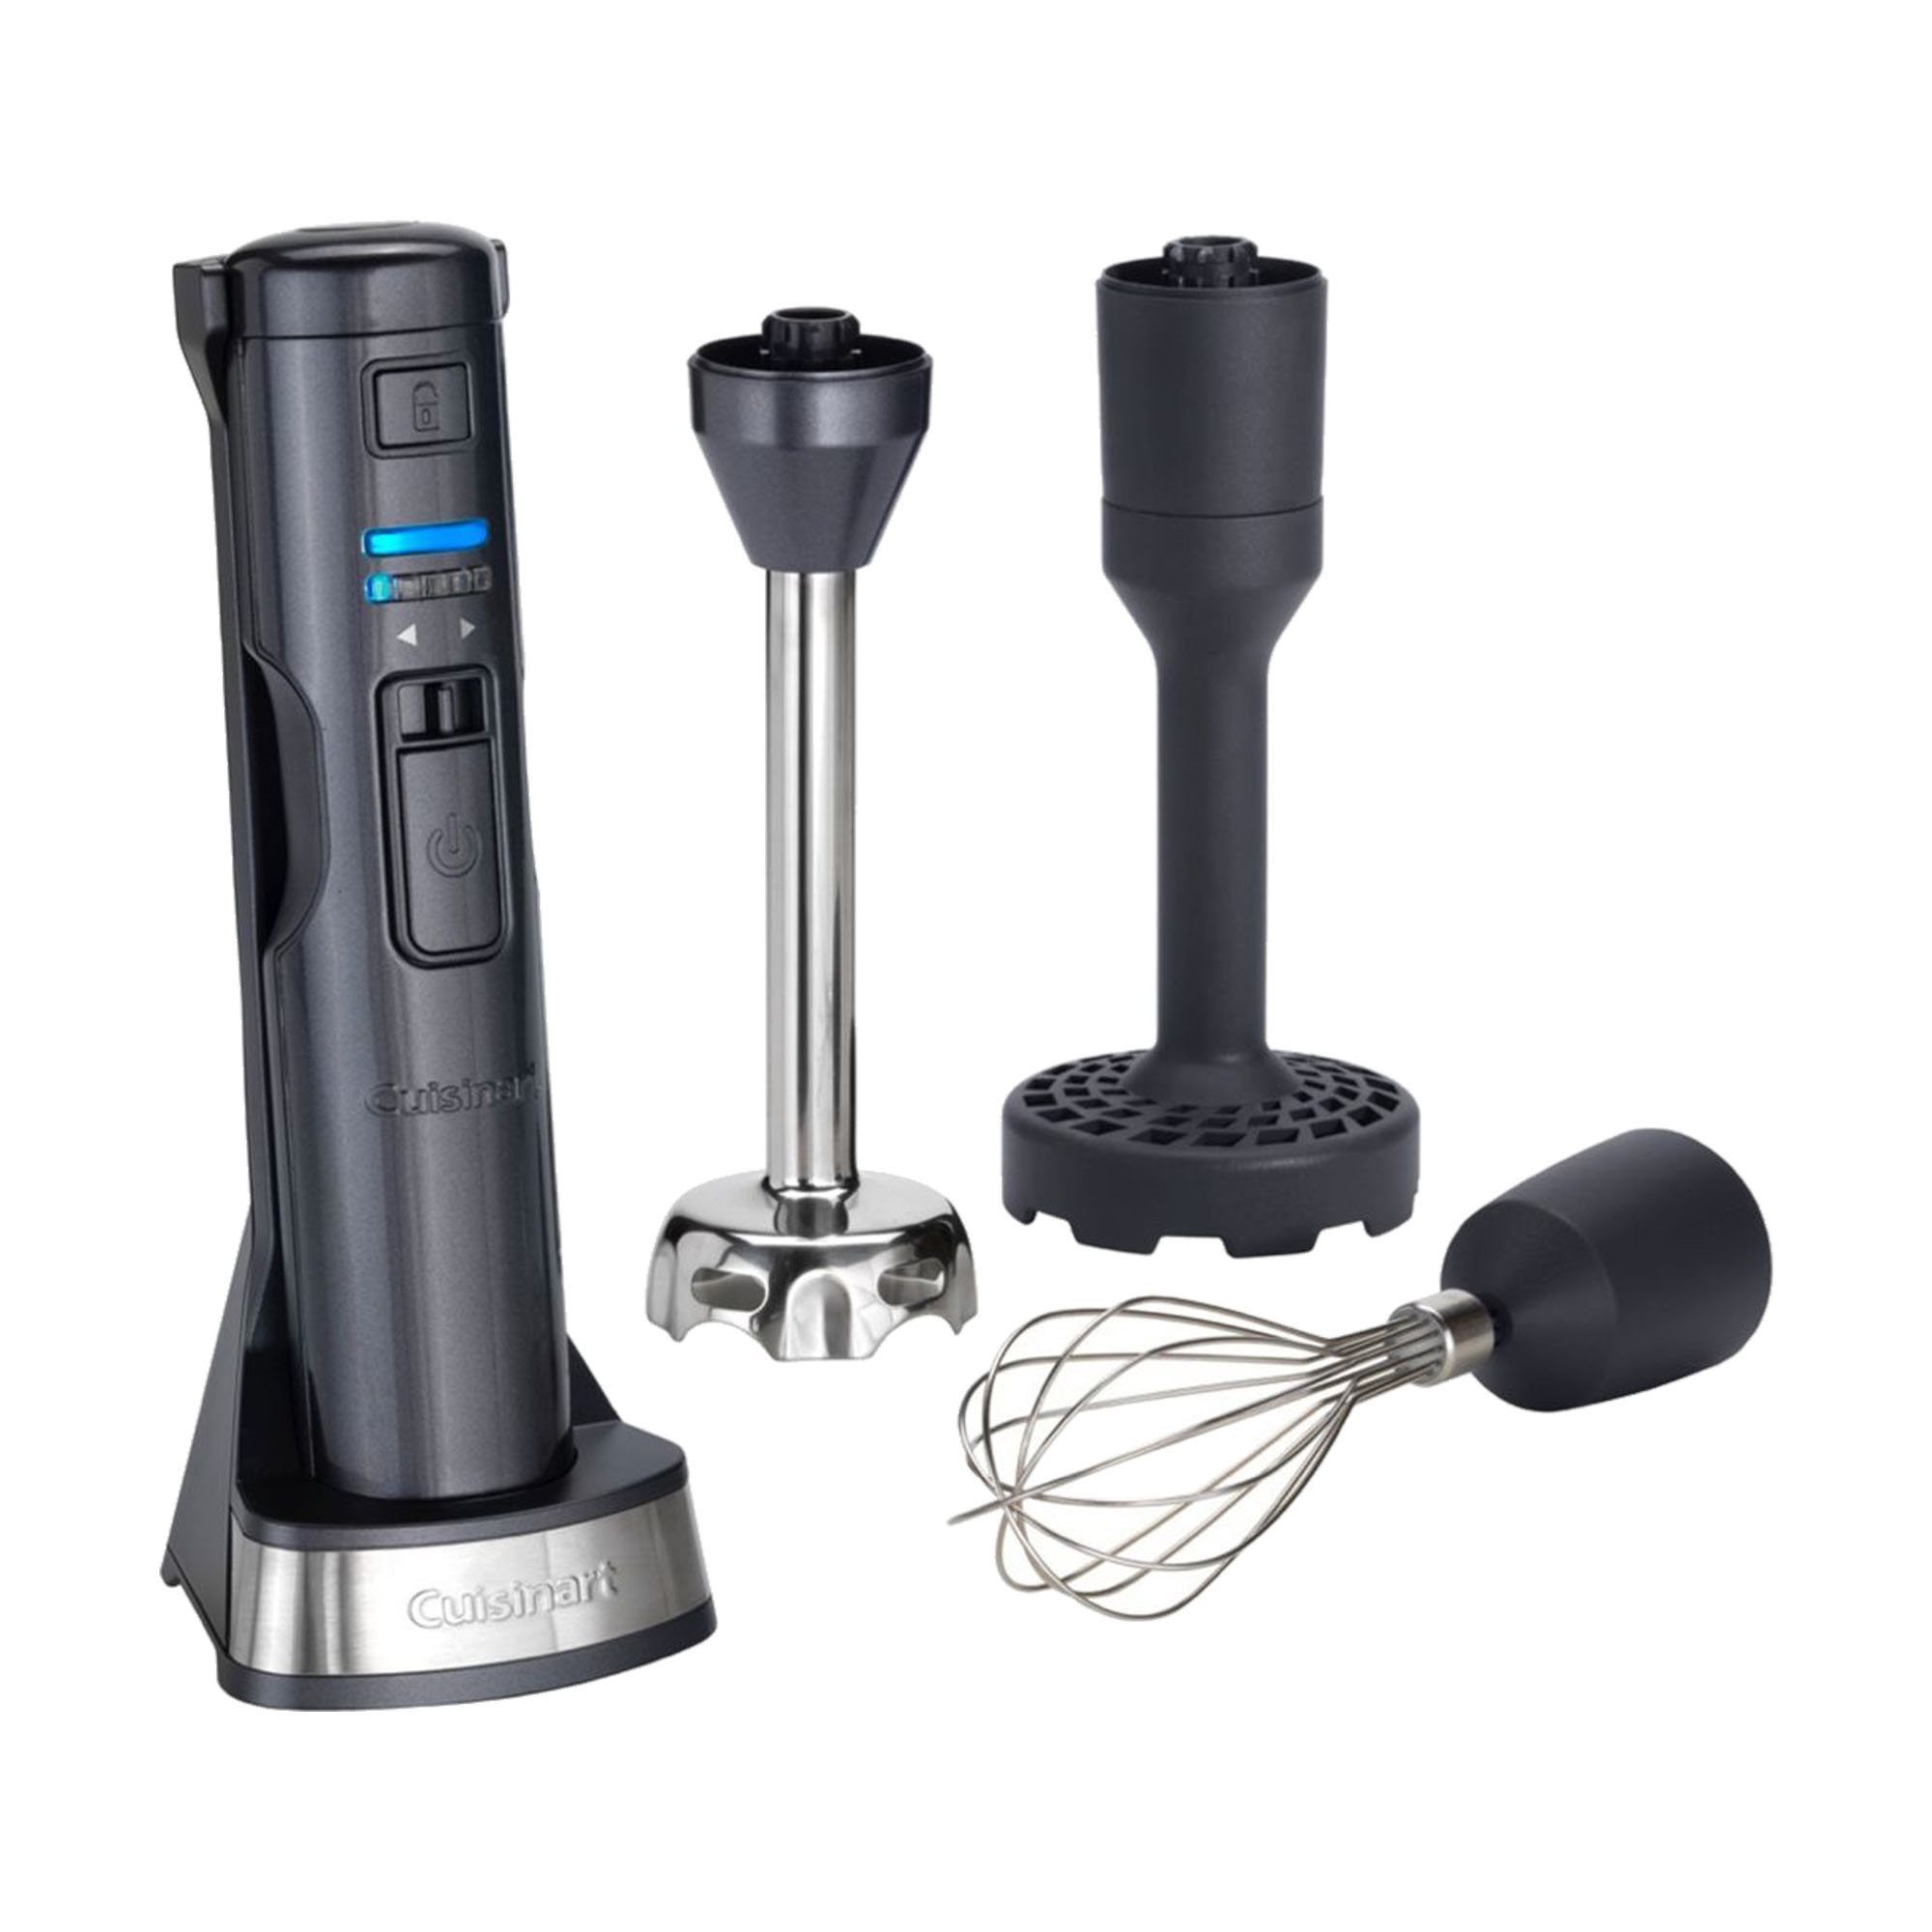 Cuisinart Immersion Blender How To Use